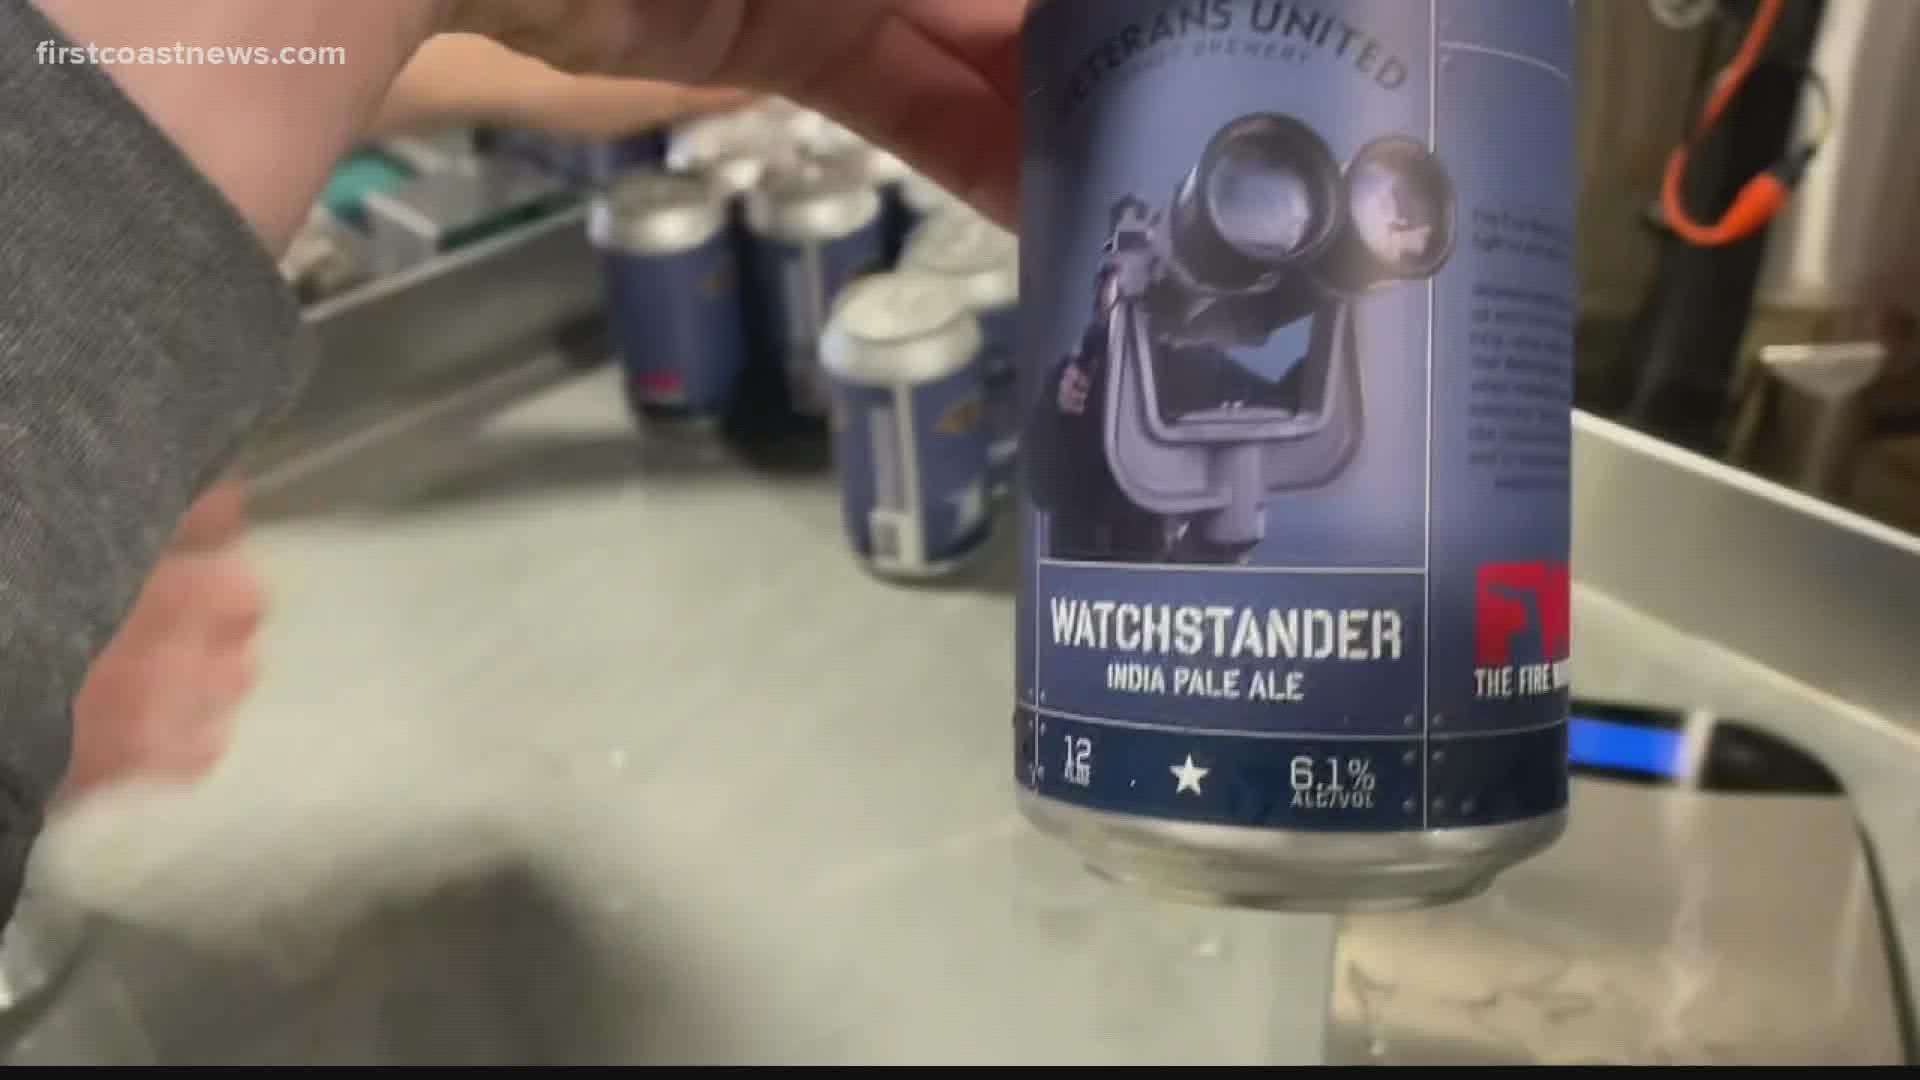 The Watchstander IPA comes with a QR code on the can that direct people to a site to help veterans in need of help with their mental health.